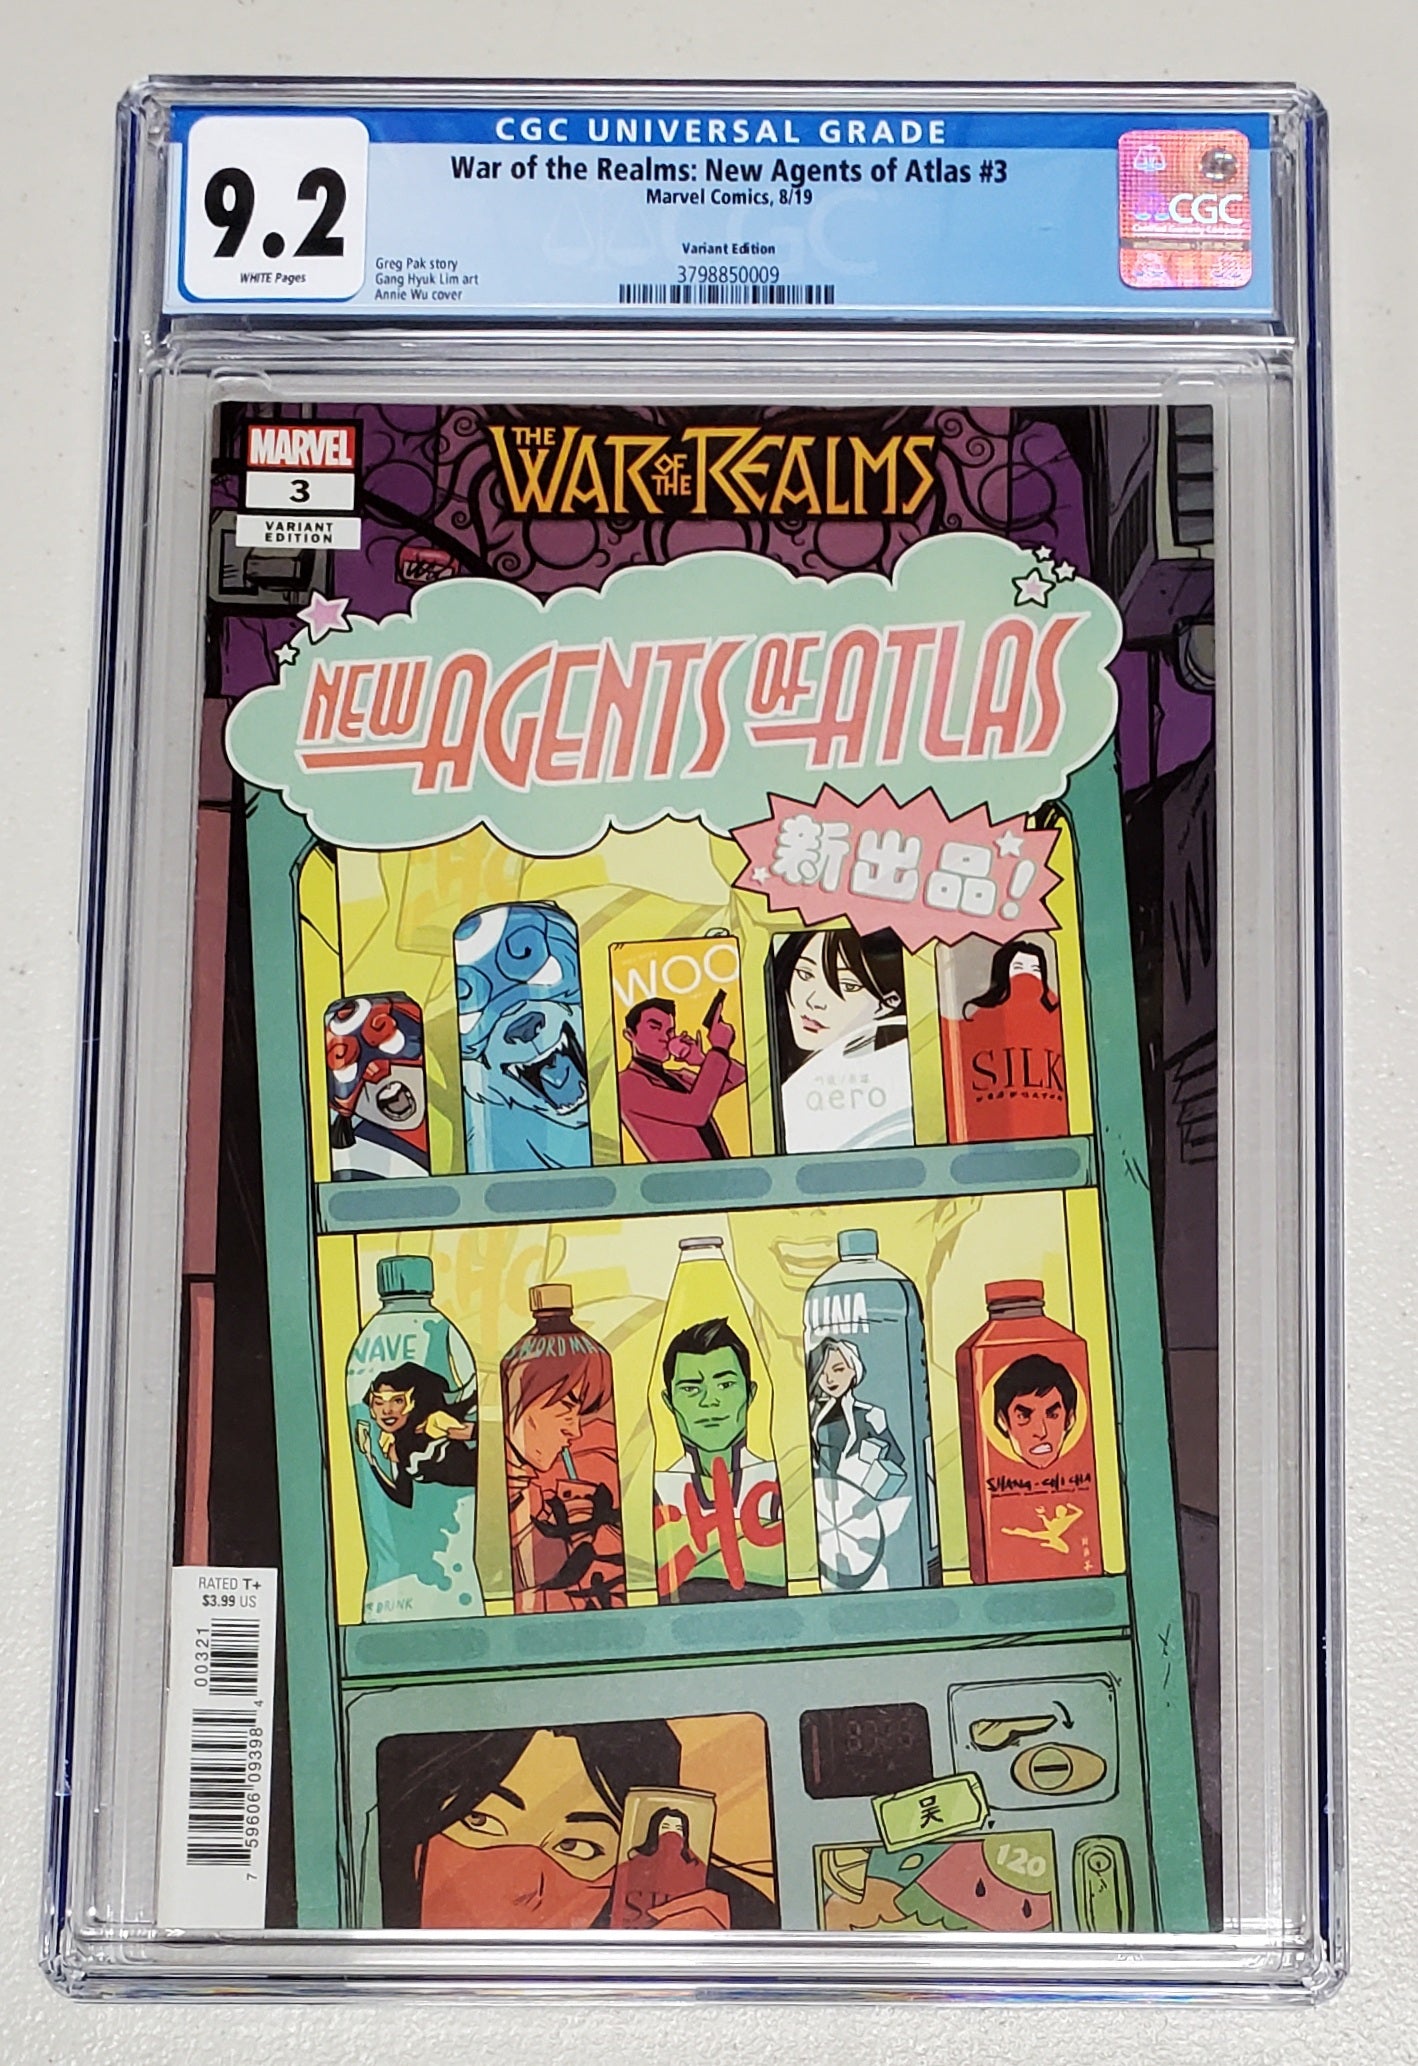 9.2 CGC WAR OF THE REALMS NEW AGENTS OF ATLAS #3 1:25 WU VARIANT [3798850009]